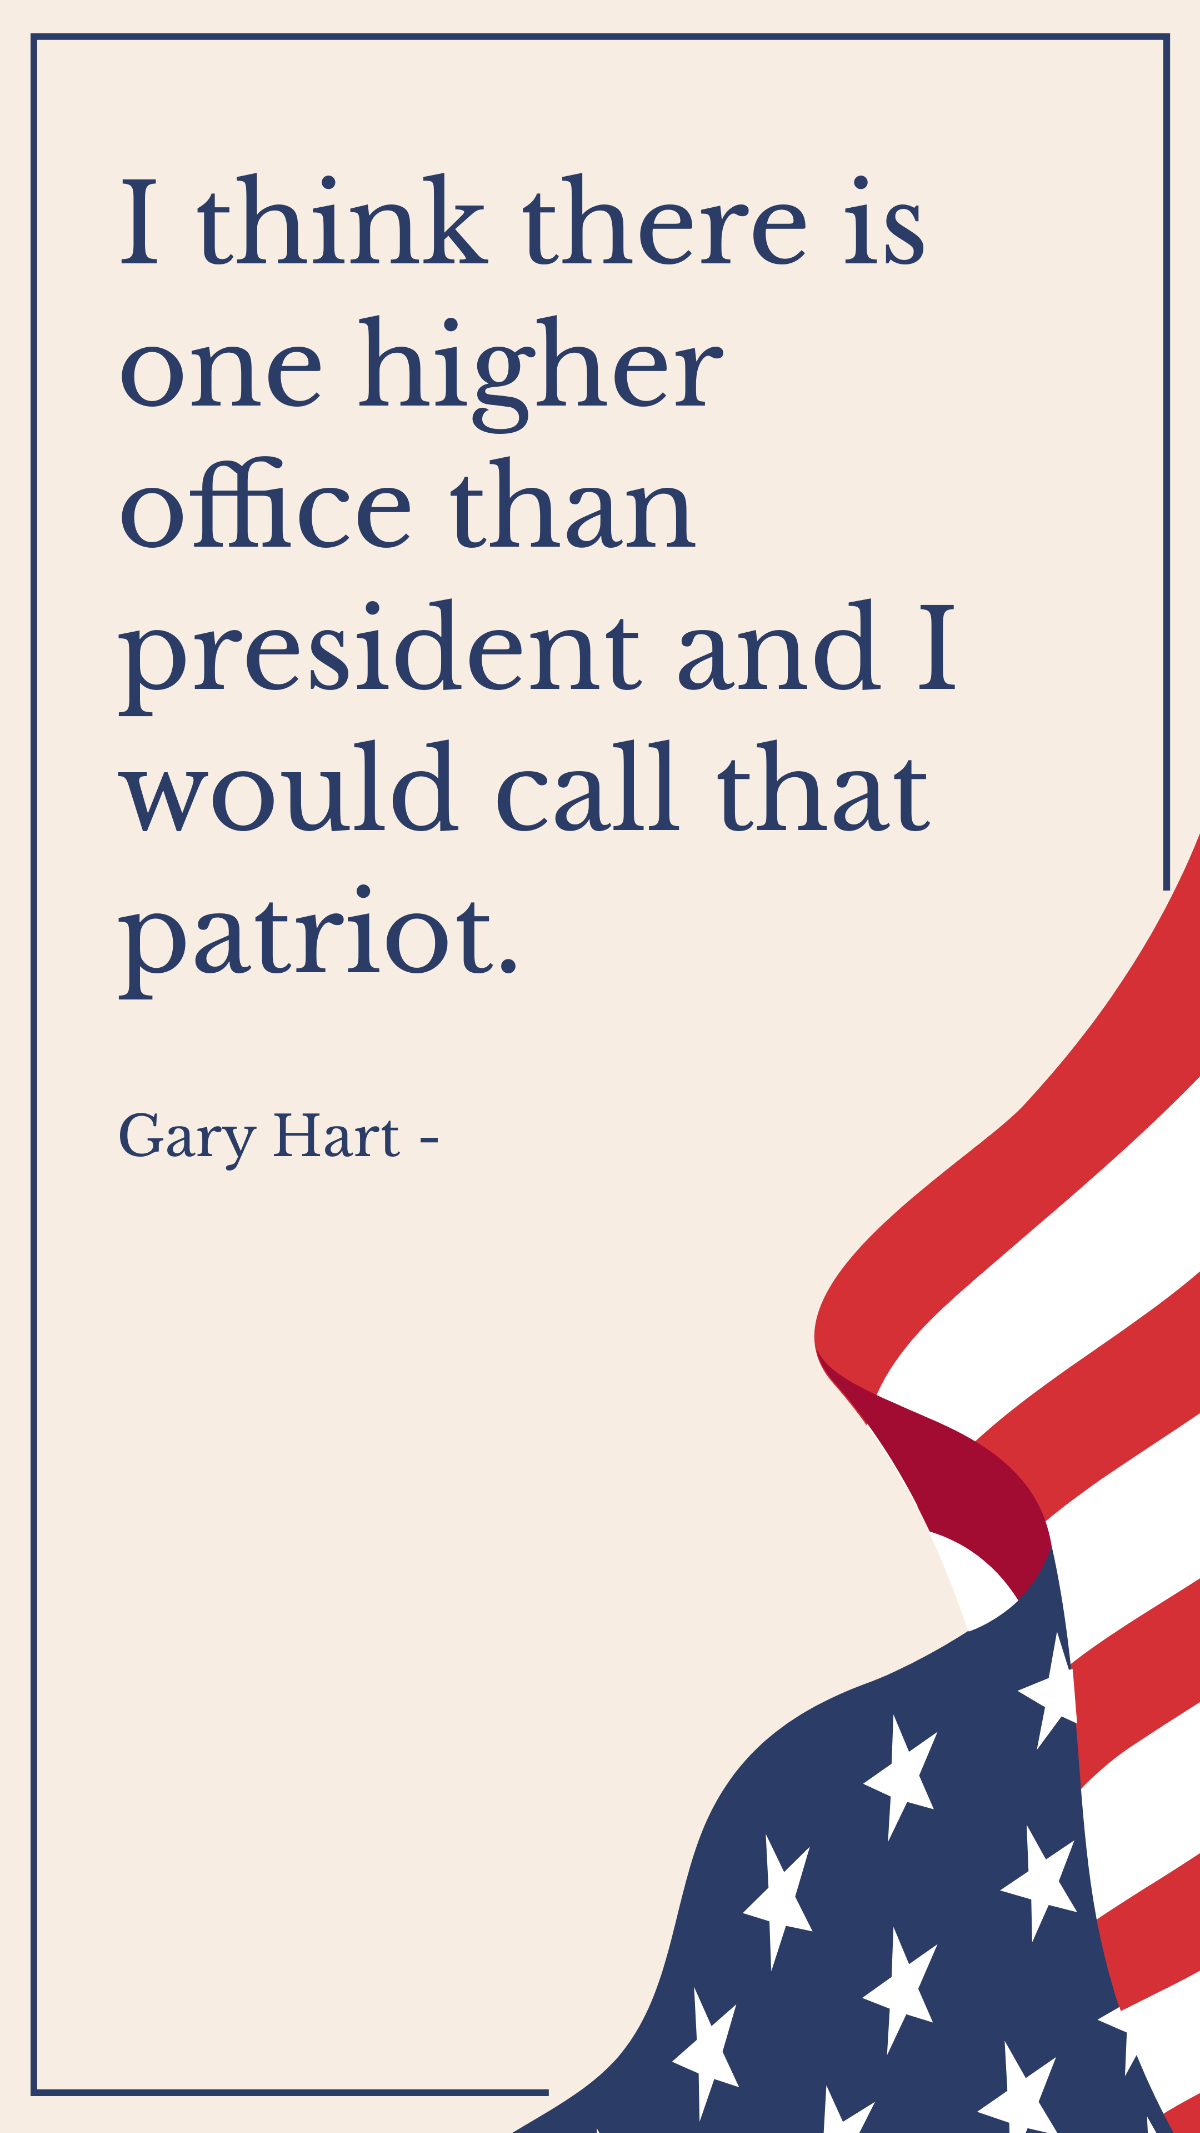 Gary Hart - I think there is one higher office than president and I would call that patriot. Template